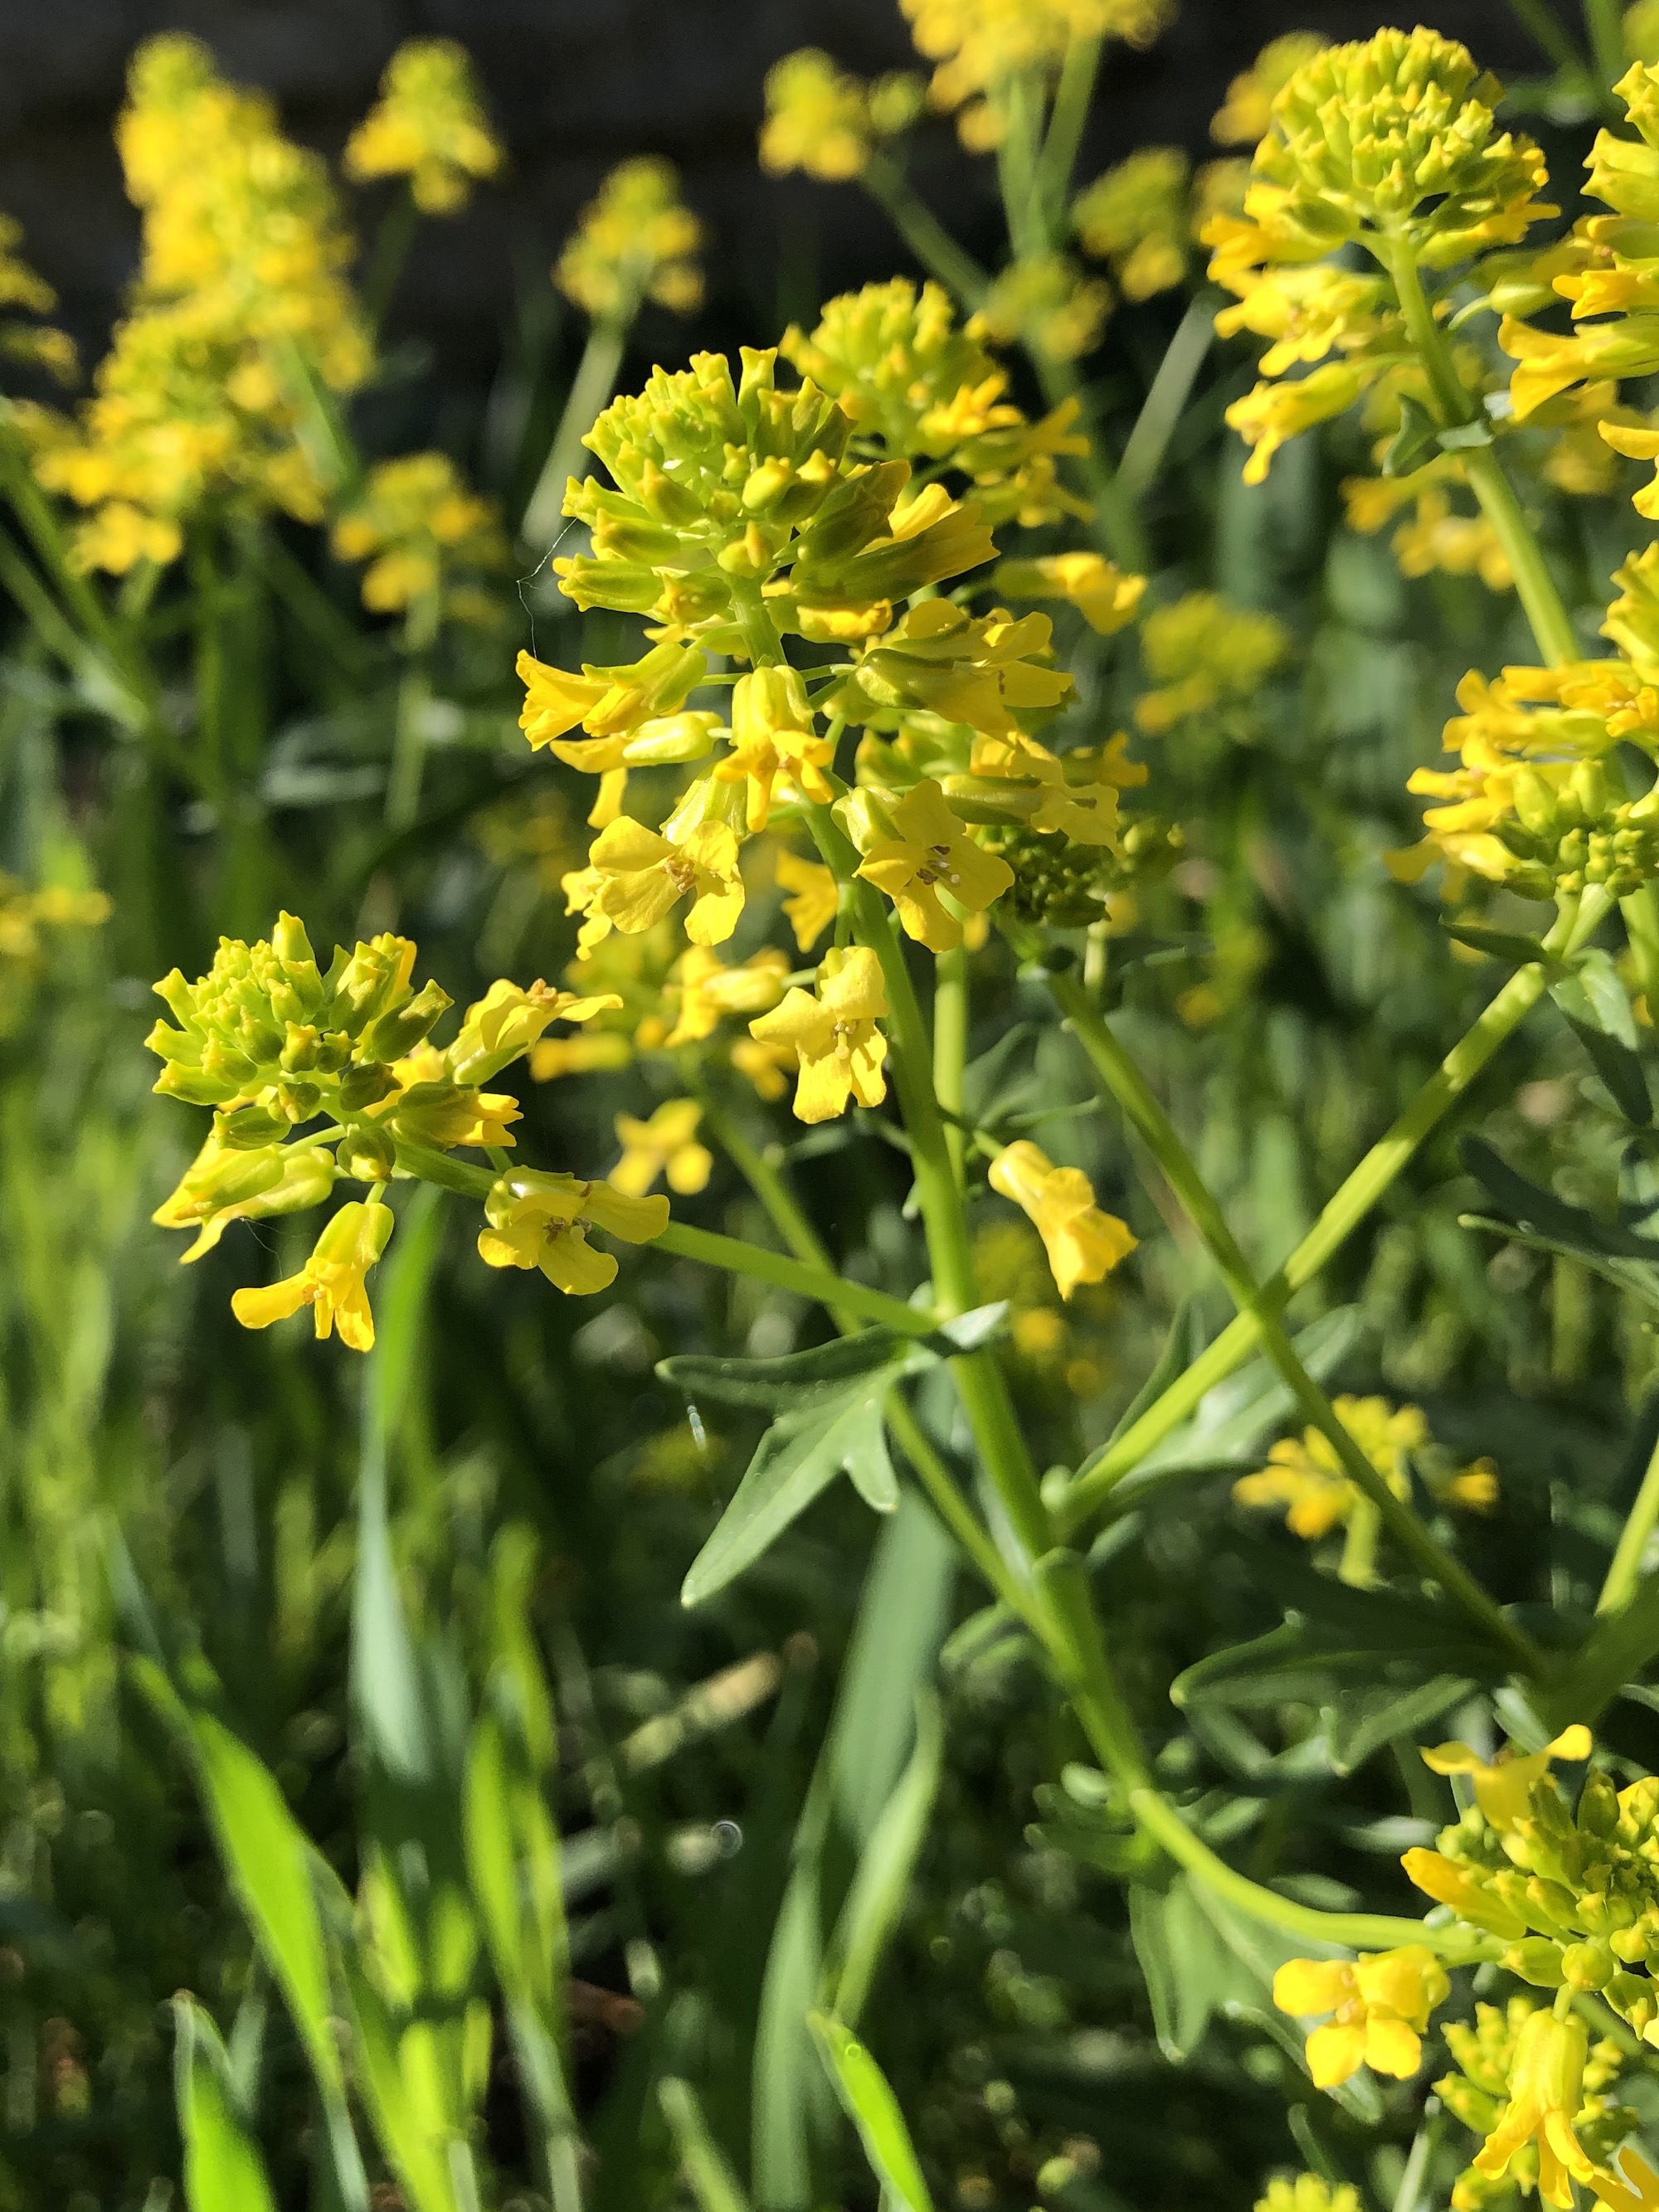 Garden Yellow Rocket near Duck Pond in Madison, Wisconsin on May 54, 2021.